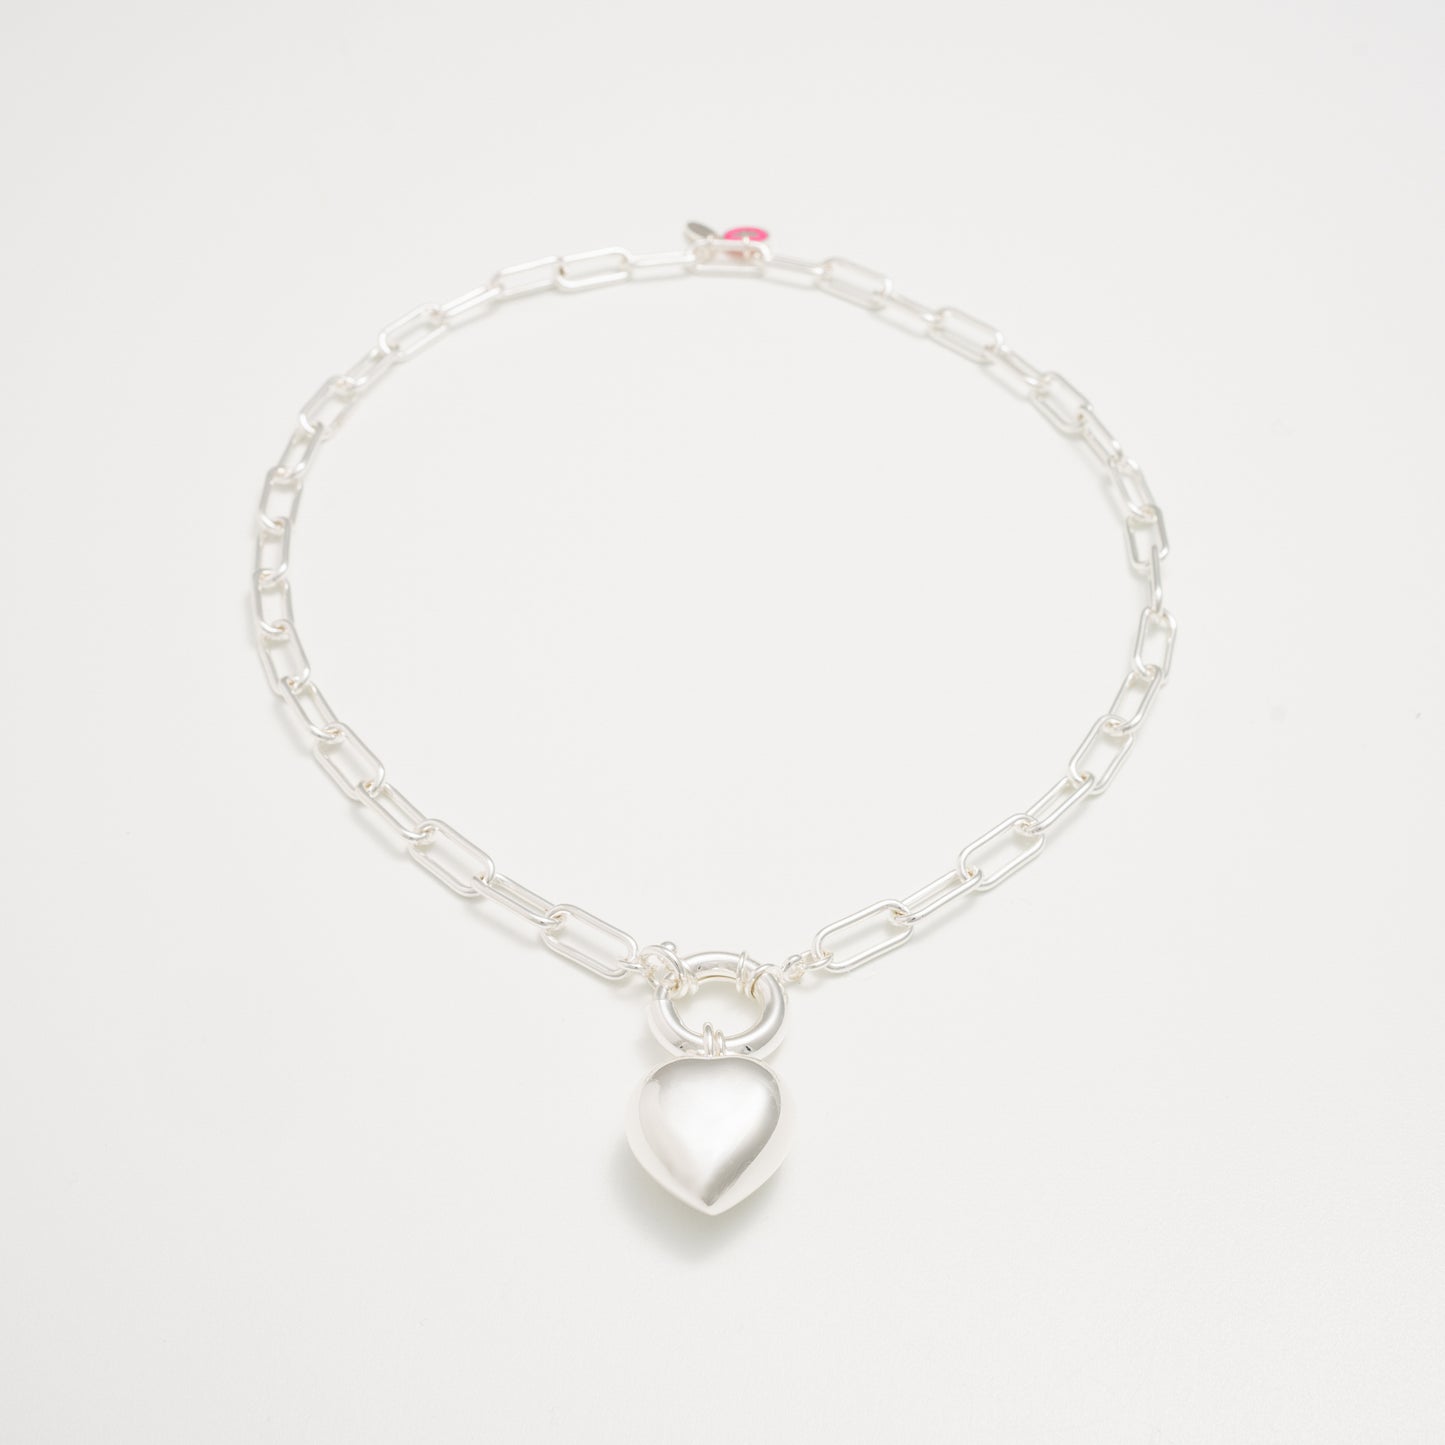 Lonely Heart Necklace - Silver